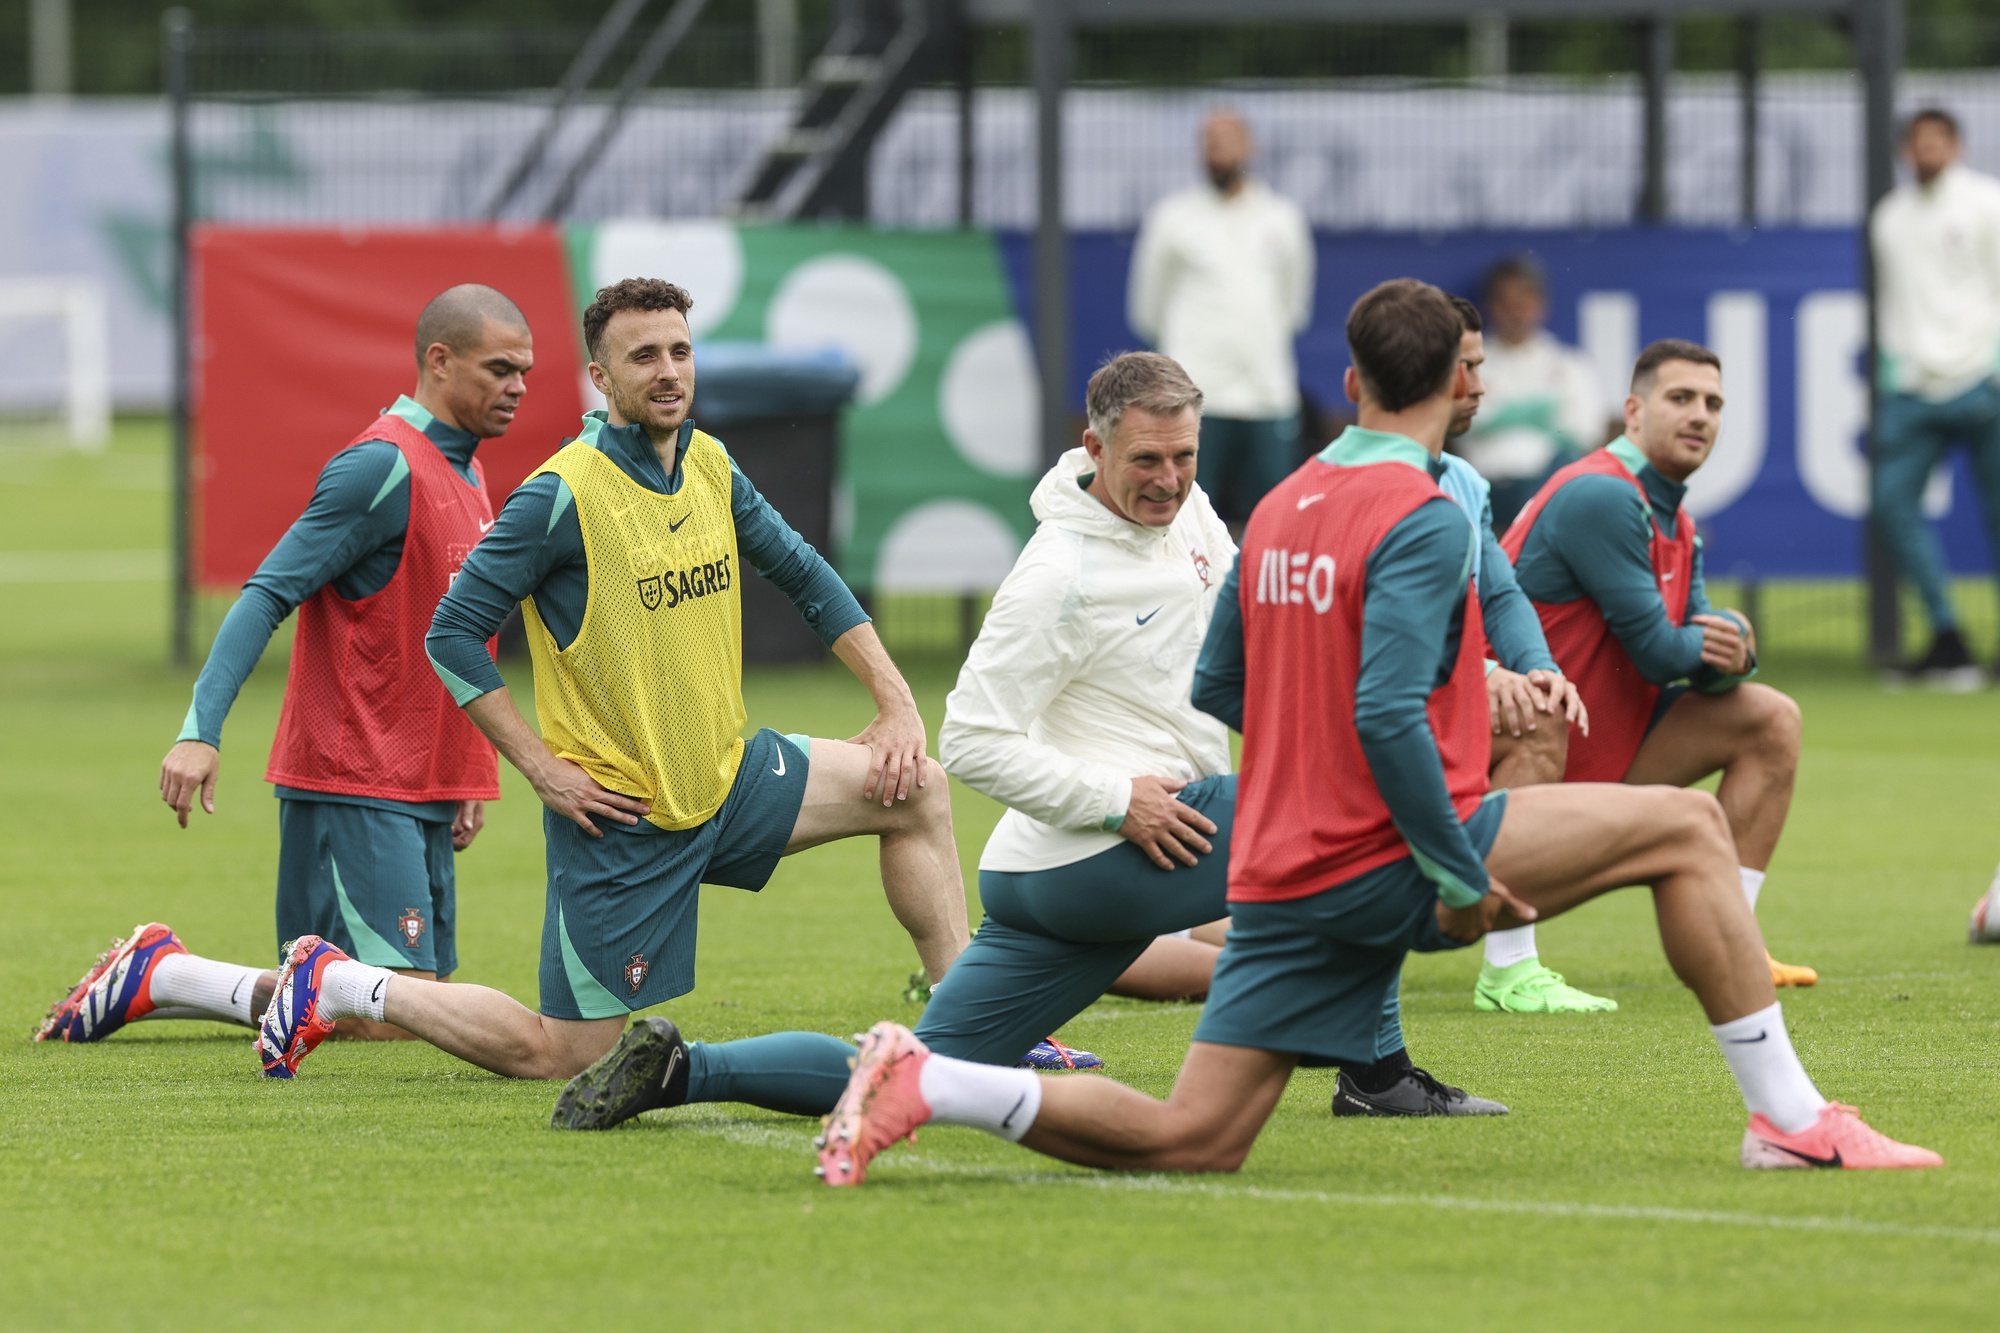 Portugal national soccer team players (L-R) Pepe, Diogo Jota, Ruben Dias, Diogo Dalot during a training session in Marienfeld, Harsewinkel, Germany, 20 June 2024. The Portuguese national soccer team is based in Marienfeld, Harsewinkel during the UEFA EURO 2024. MIGUEL A. LOPES/LUSA